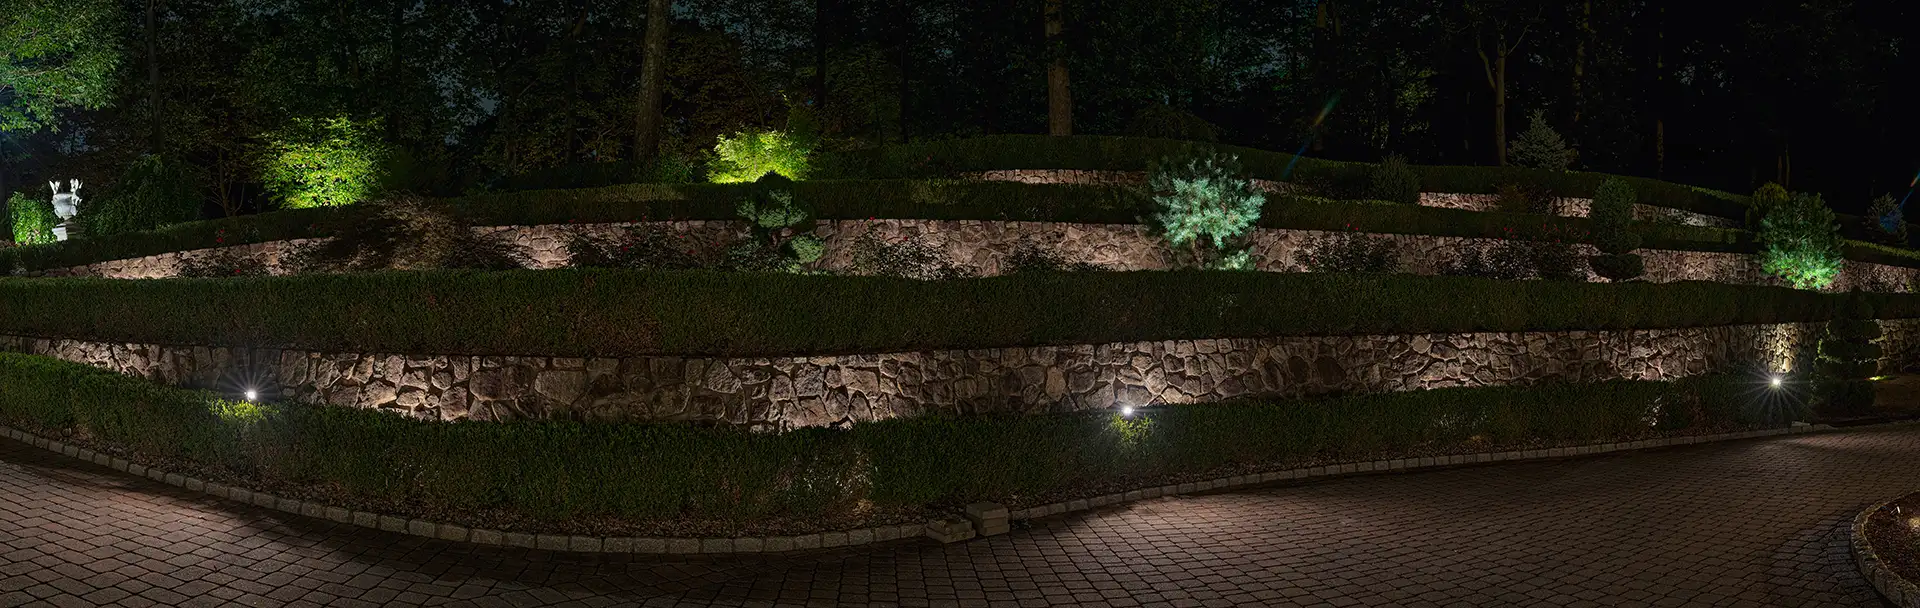 He residence image 1 wall landscape lighting Lighthouse Outdoor Lighting and Audio Northern New Jersey